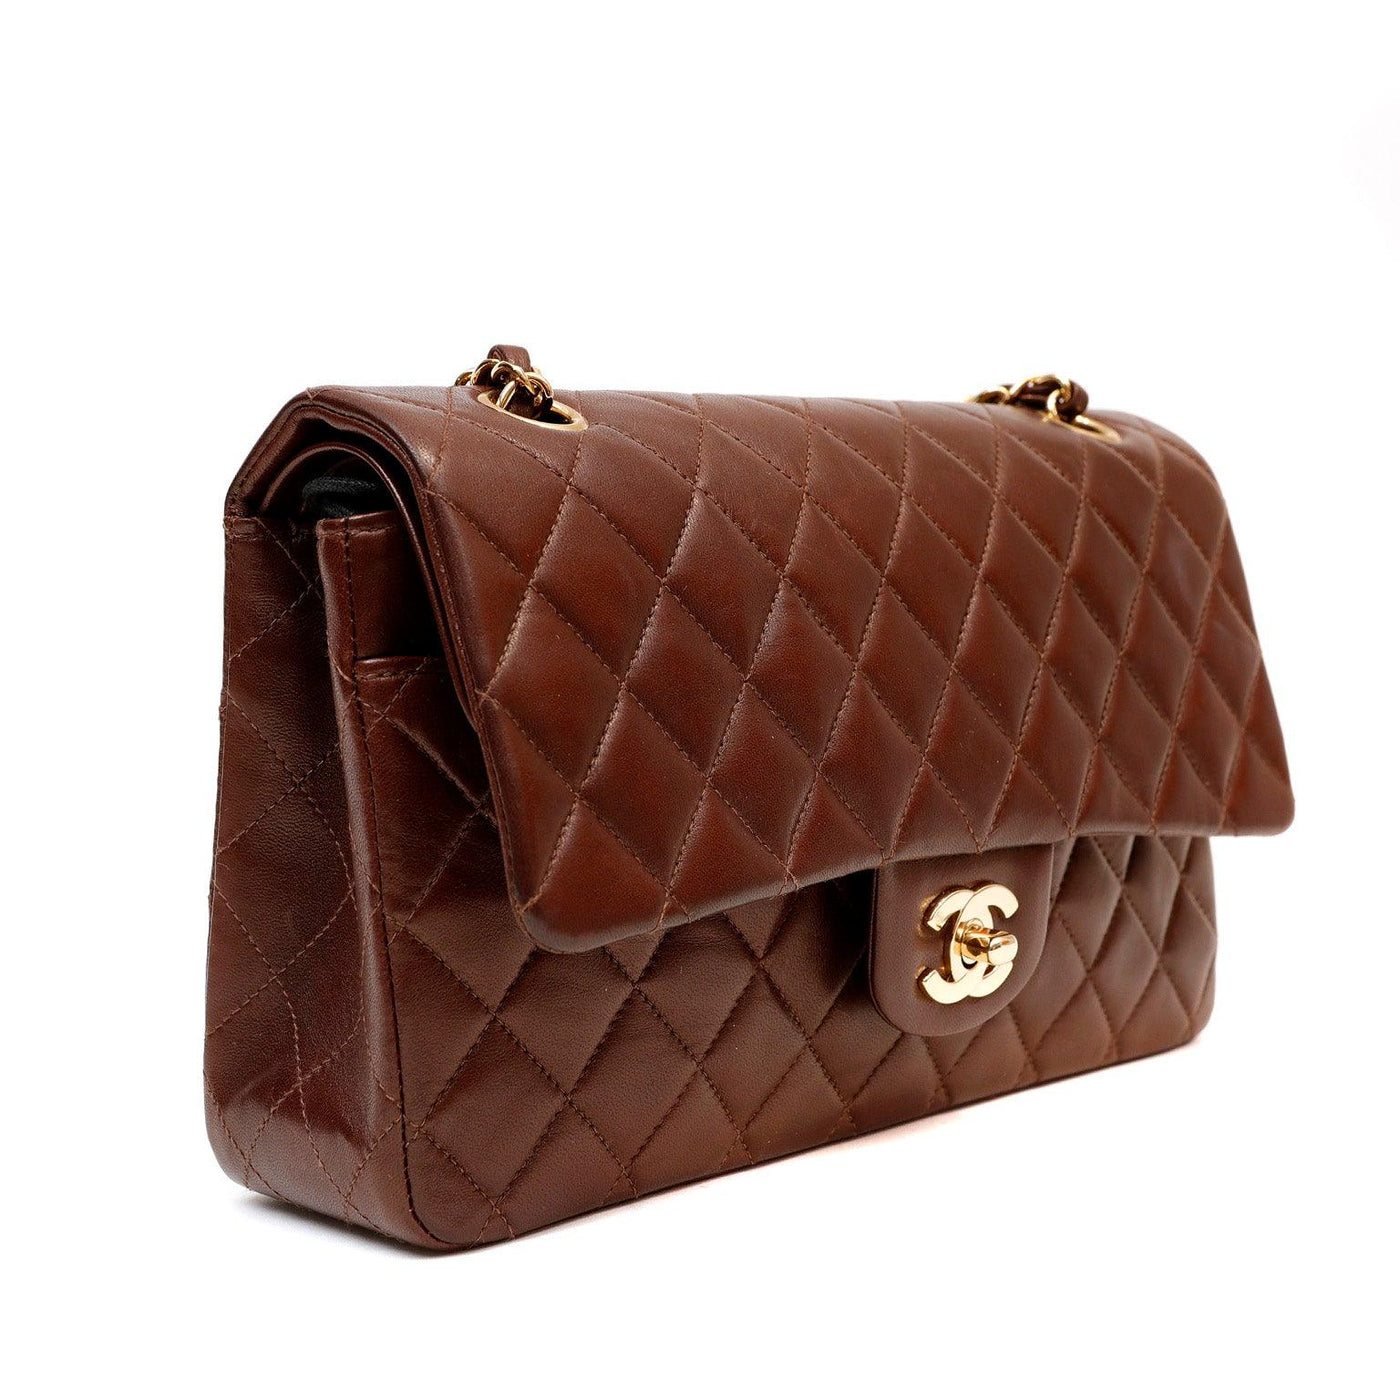 Chanel Brown Lambskin Medium Classic Double Flap Bag - Only Authentics